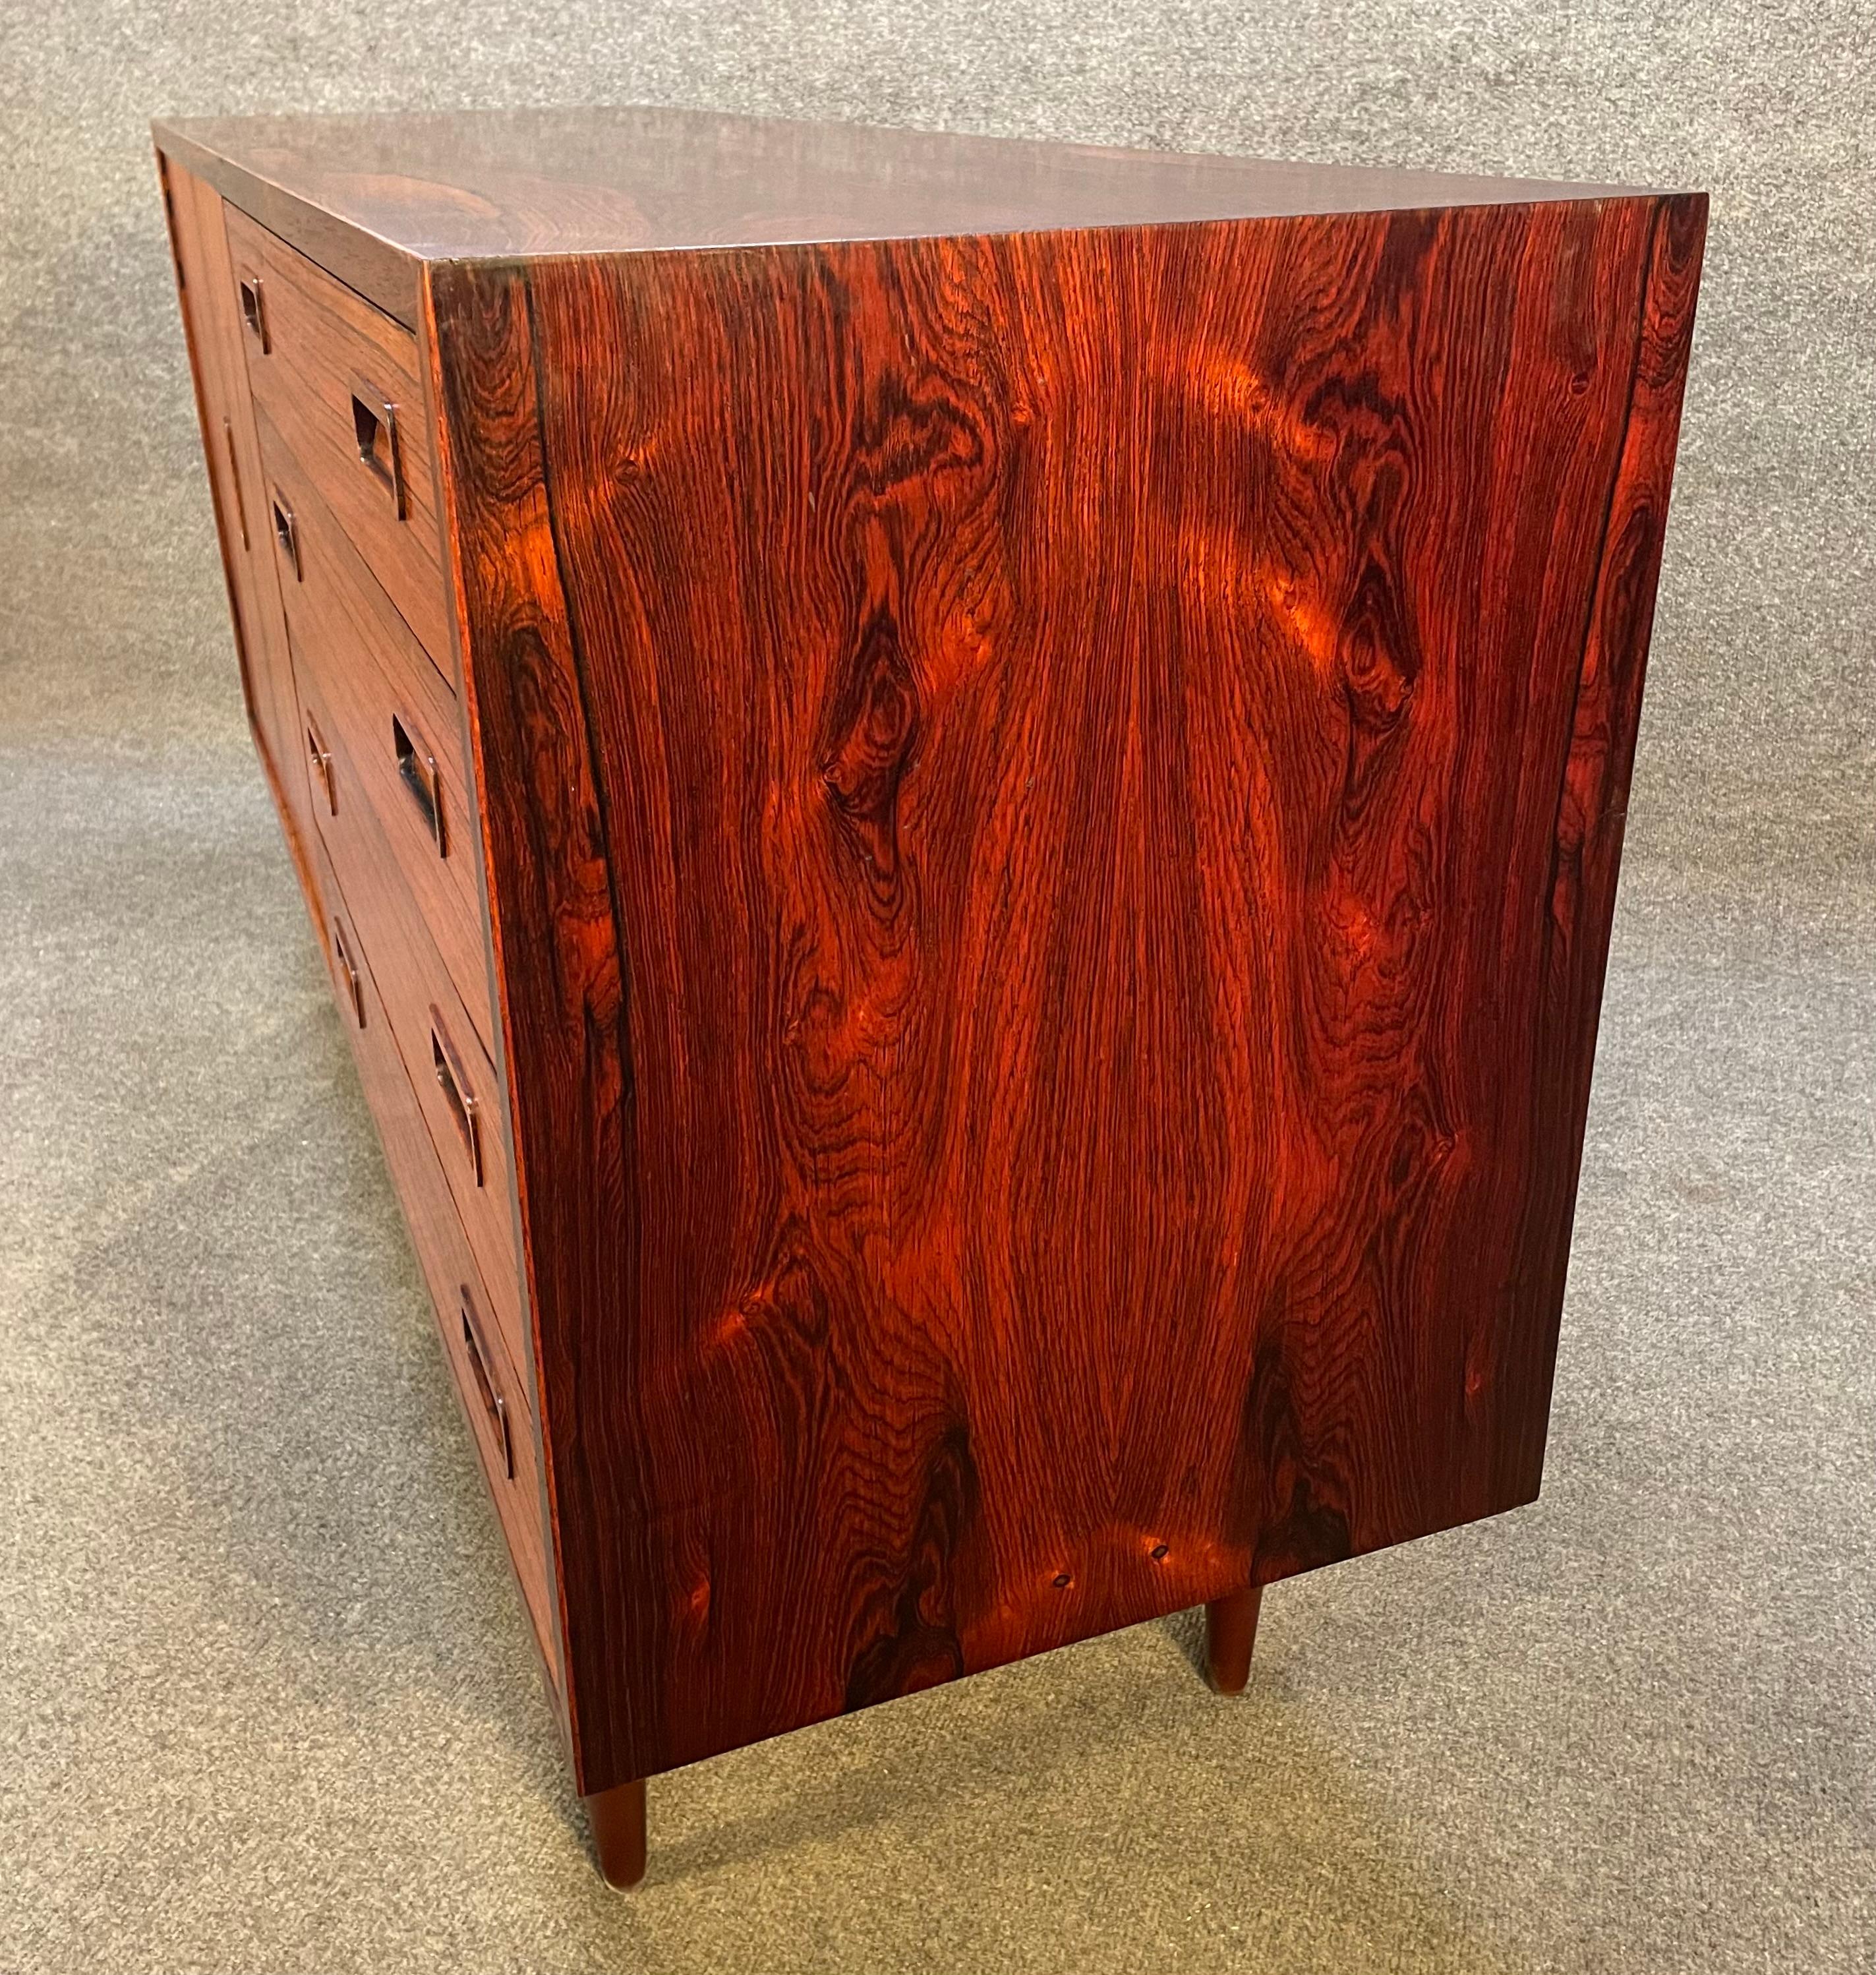 Here is a beautiful scandinavian modern sideboard in Brazilian rosewood designed by Carlo Jensen and manufactured by Poul Hundevad in Denmark in the 1960's.
This compact credenza, recently imported from Europe to California before its refinishing,